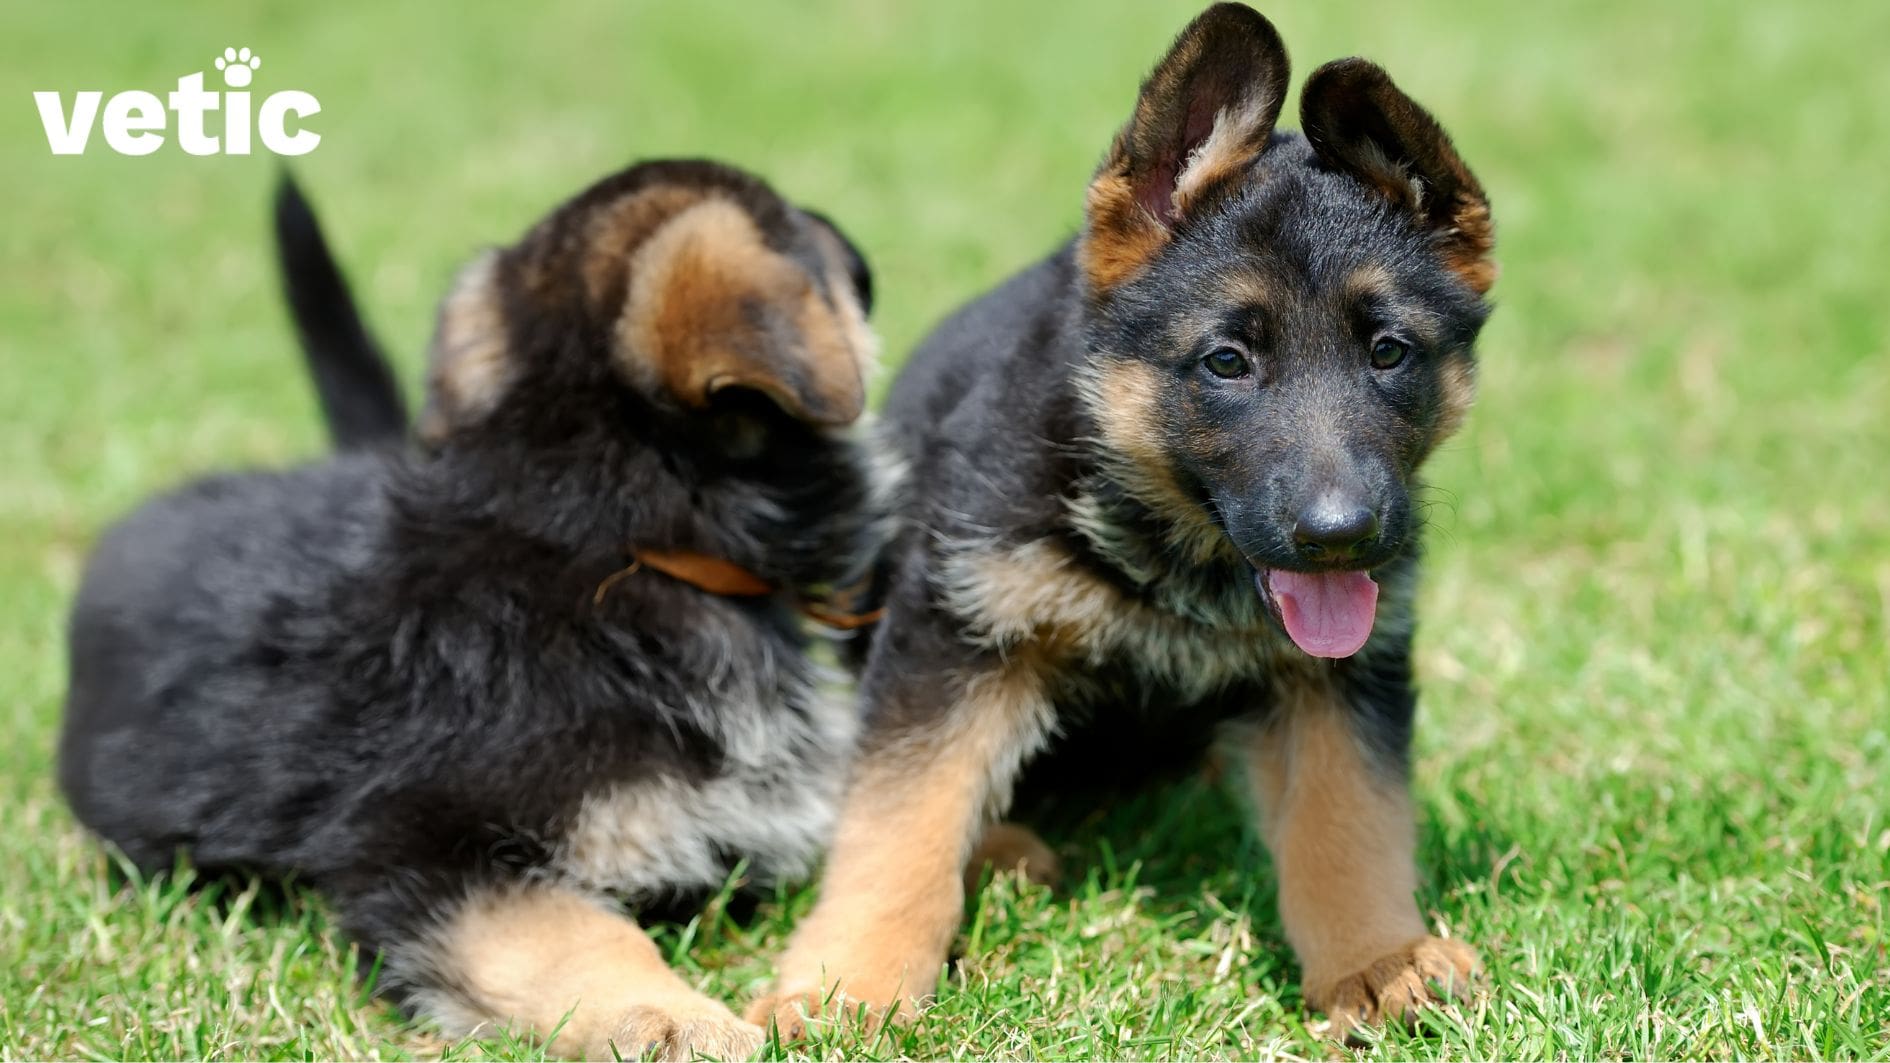 Two puppies sitting on the grass, most likely at a dog park. One has an orange collar and they are facing away from the camera. The other one is facing directly at the camera and has their tongue out.